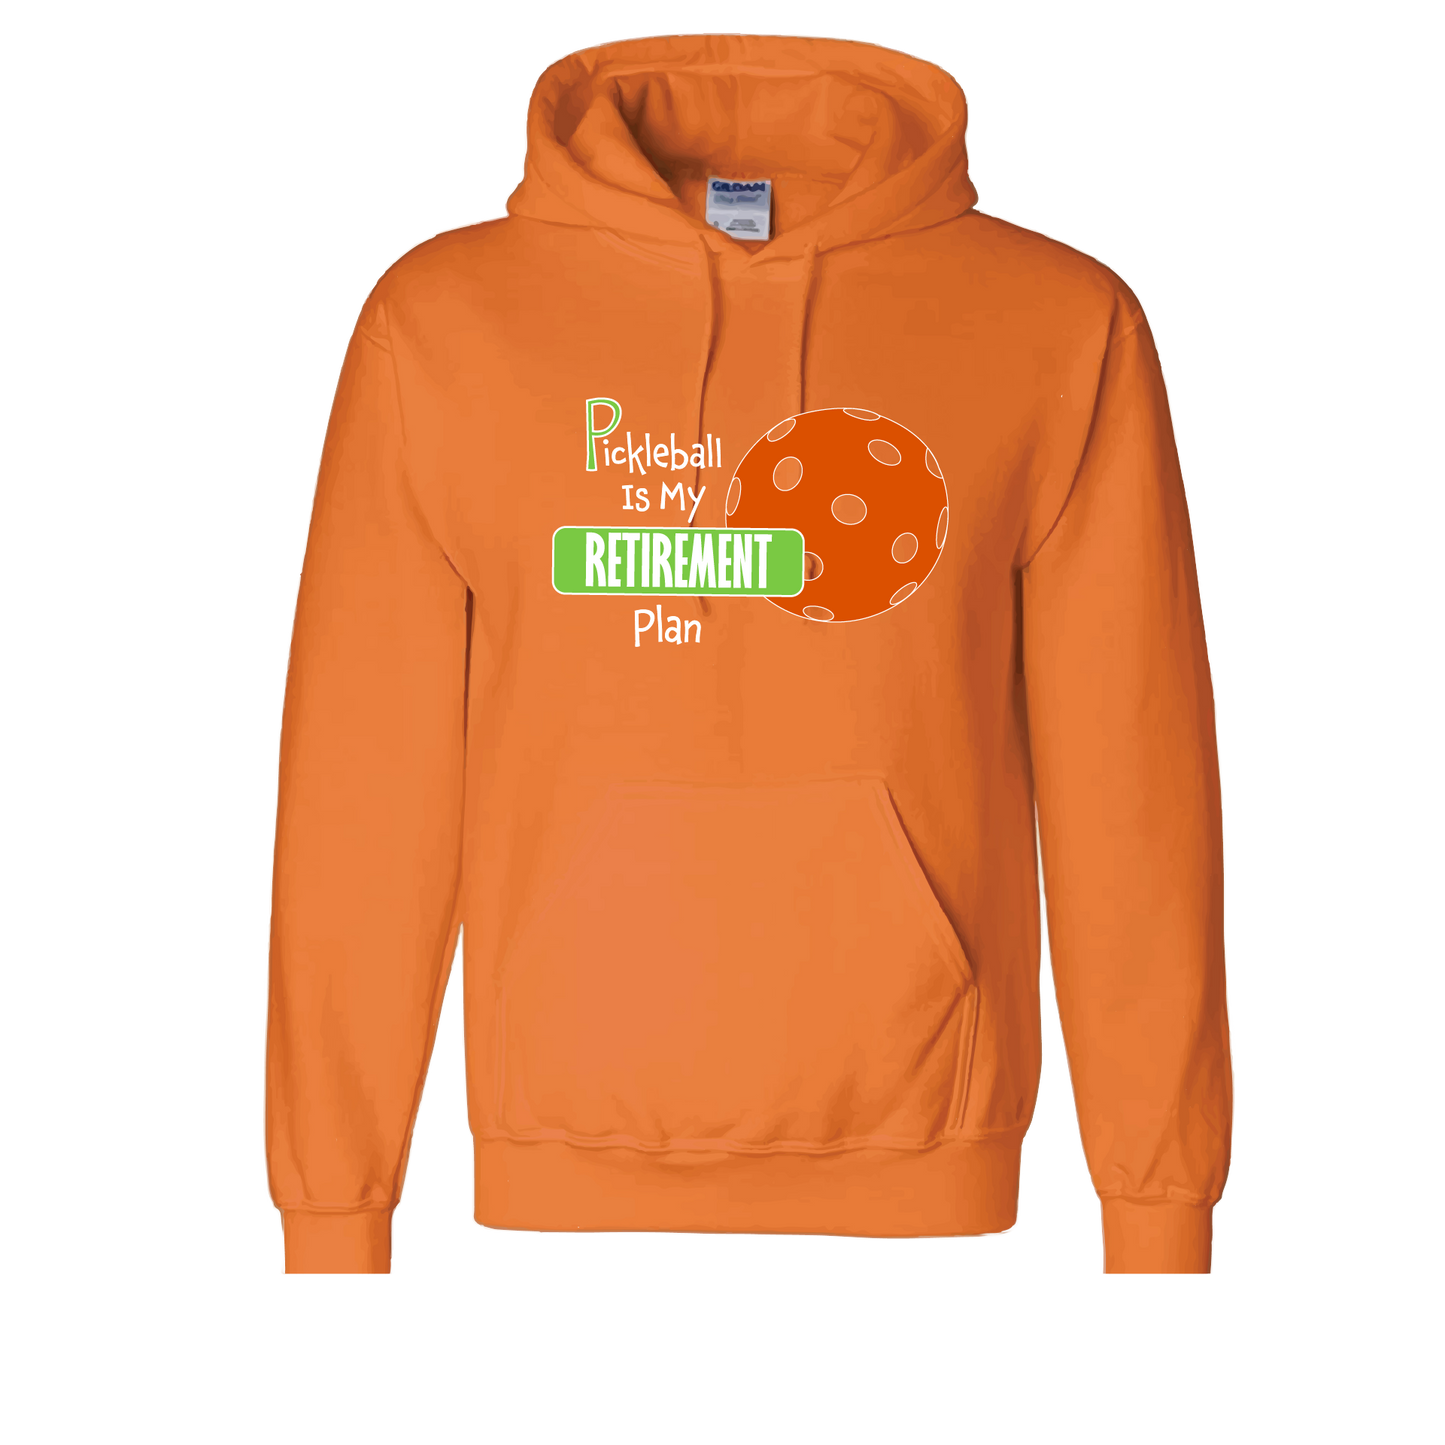 Pickleball Design: Pickleball is my Retirement Plan  Unisex Hooded Sweatshirt: Moisture-wicking, double-lined hood, front pouch pocket.  This unisex hooded sweatshirt is ultra comfortable and soft. Stay warm on the Pickleball courts while being that hit with this one of kind design.